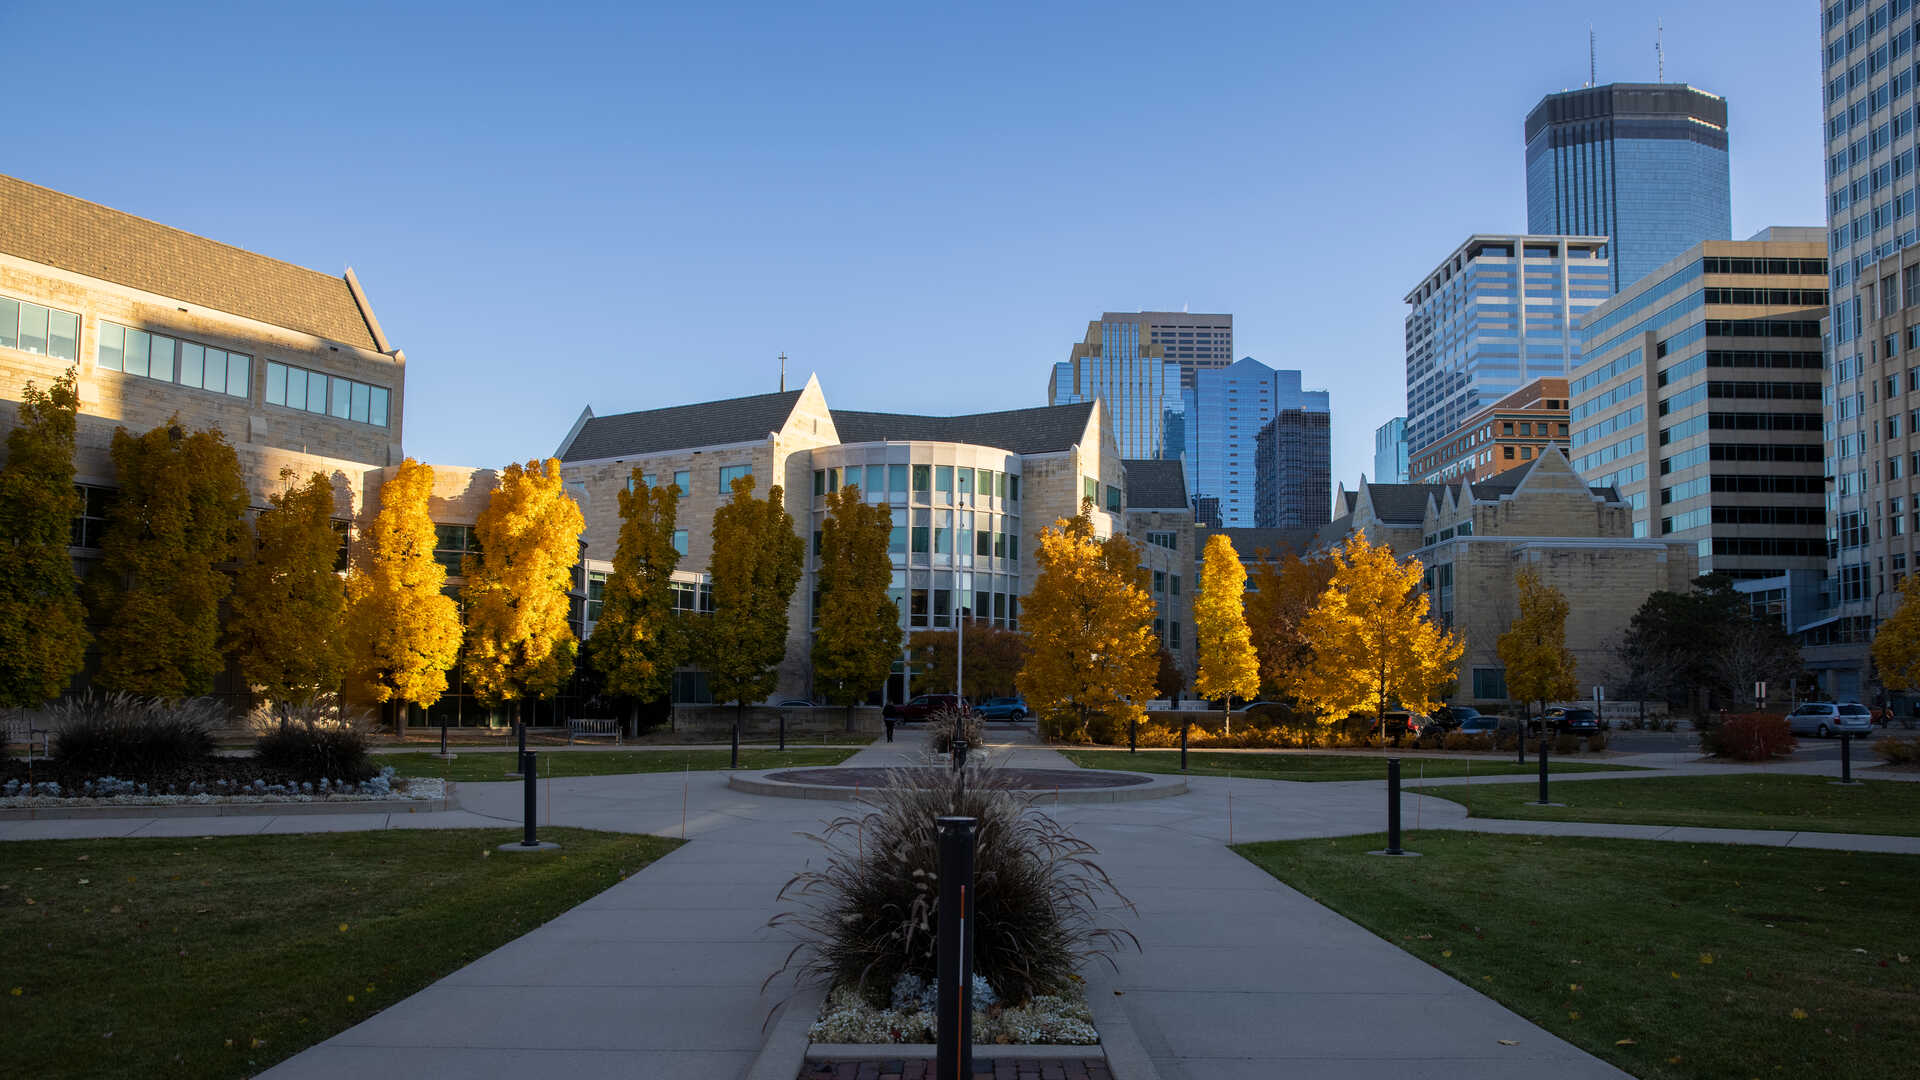 External view of St. Thomas campus in Minneapolis